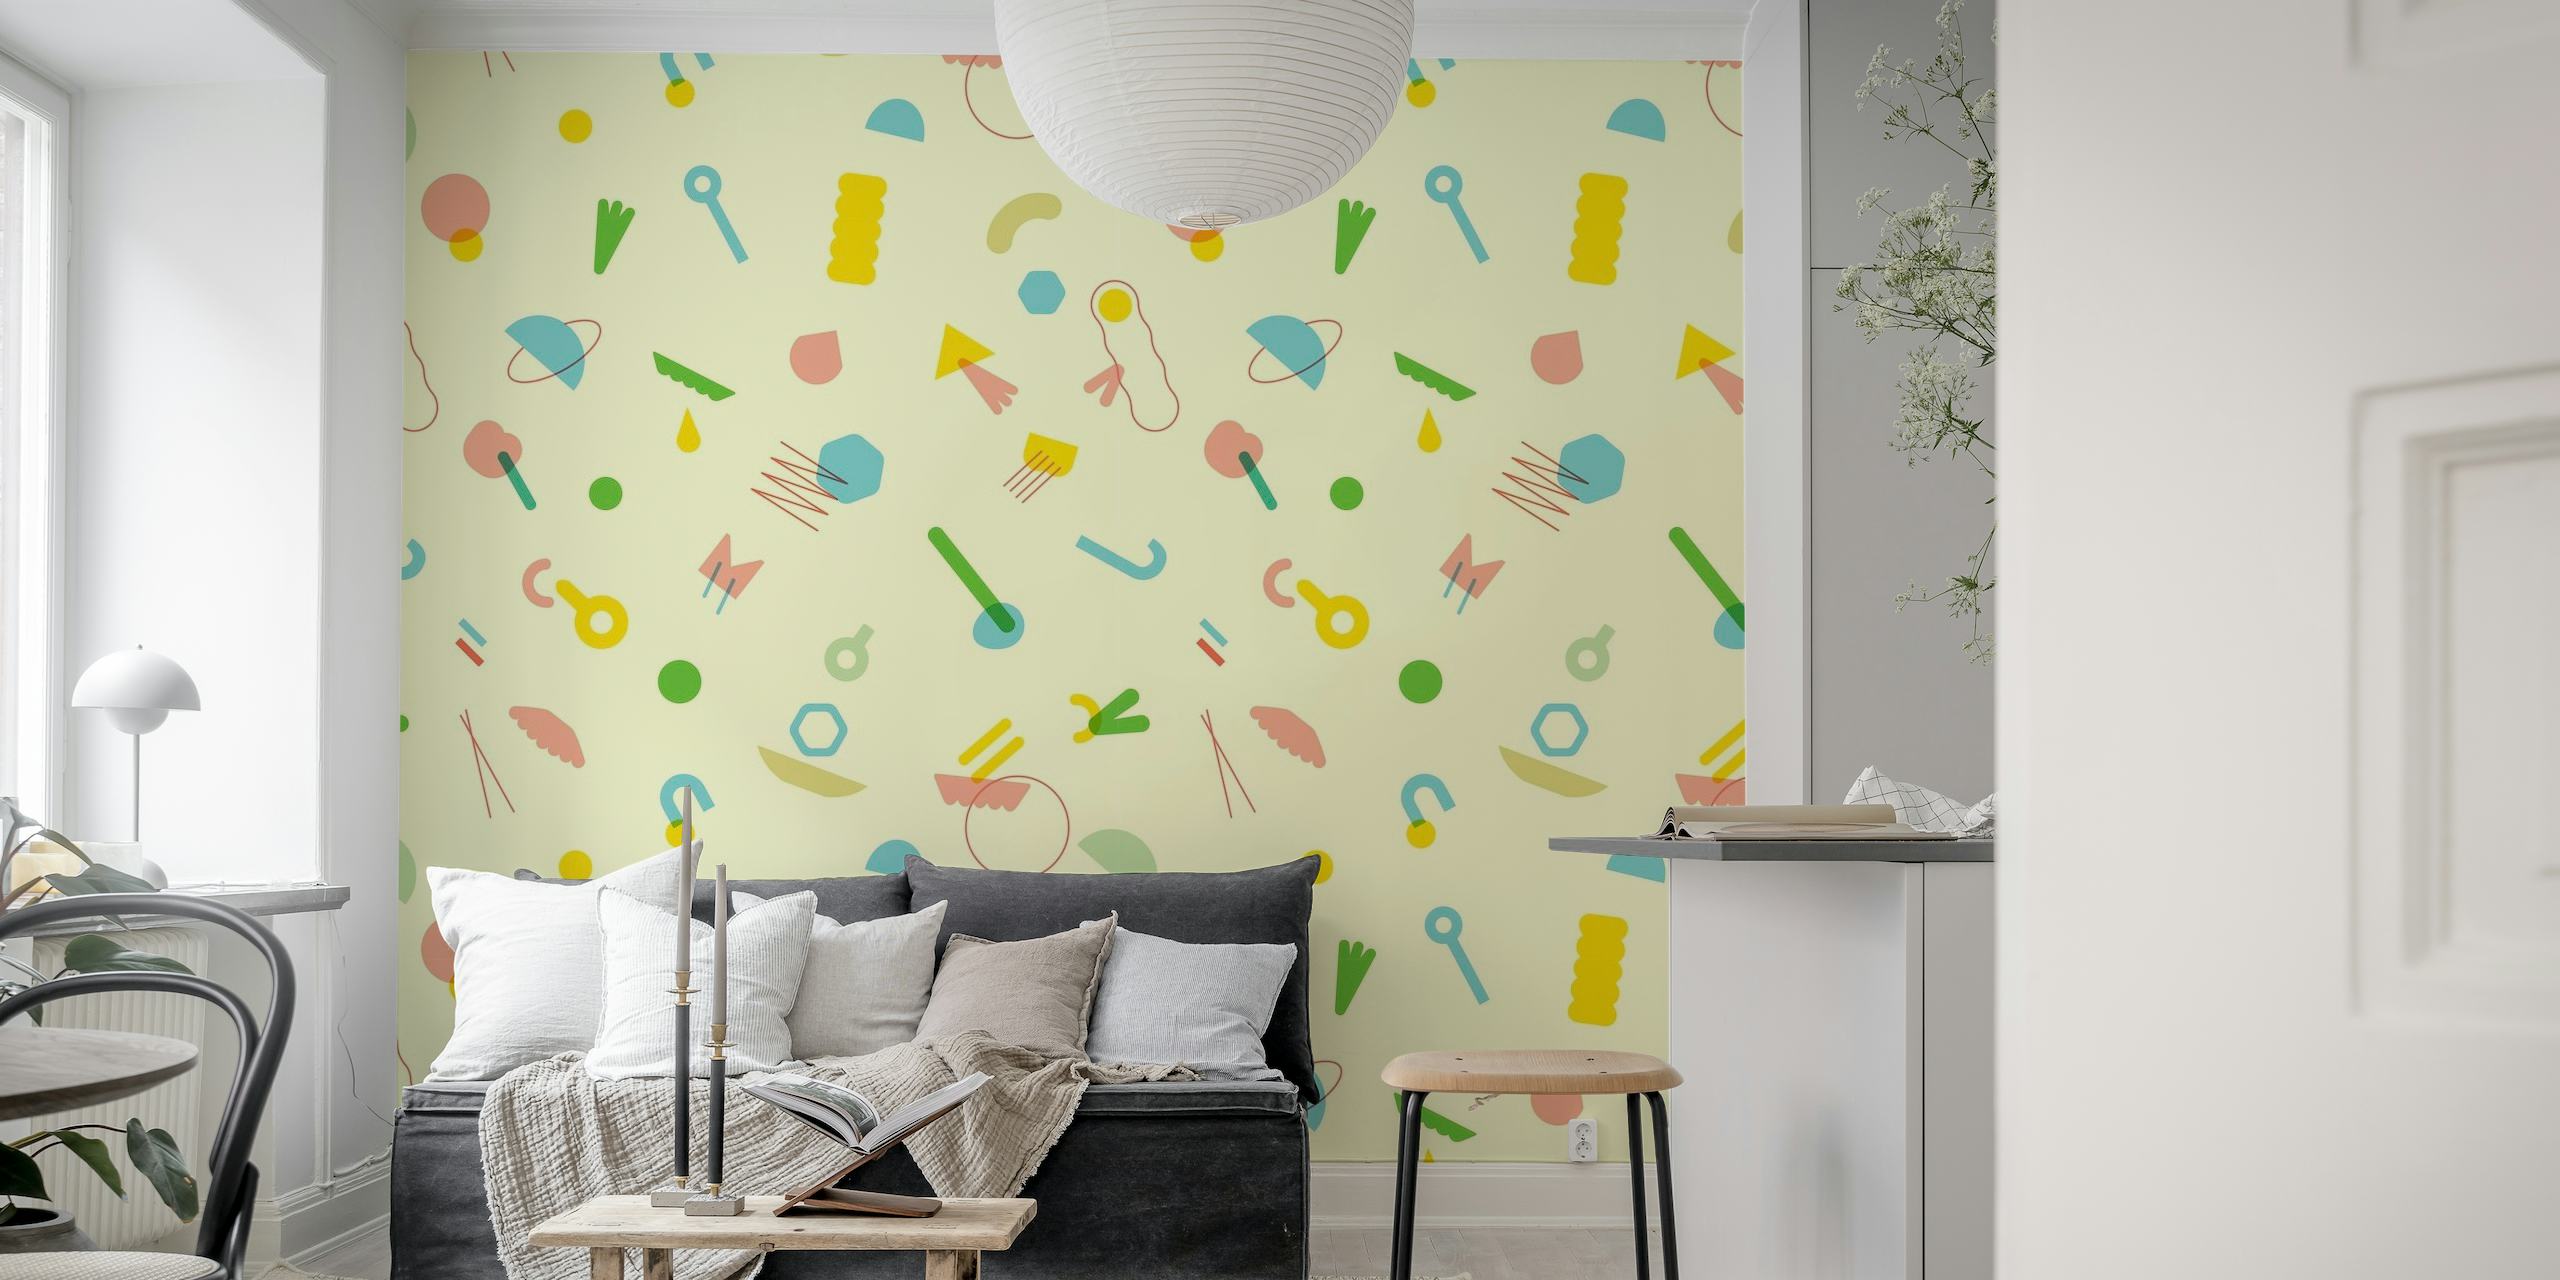 Colorful abstract figures pattern wall mural for interior decor